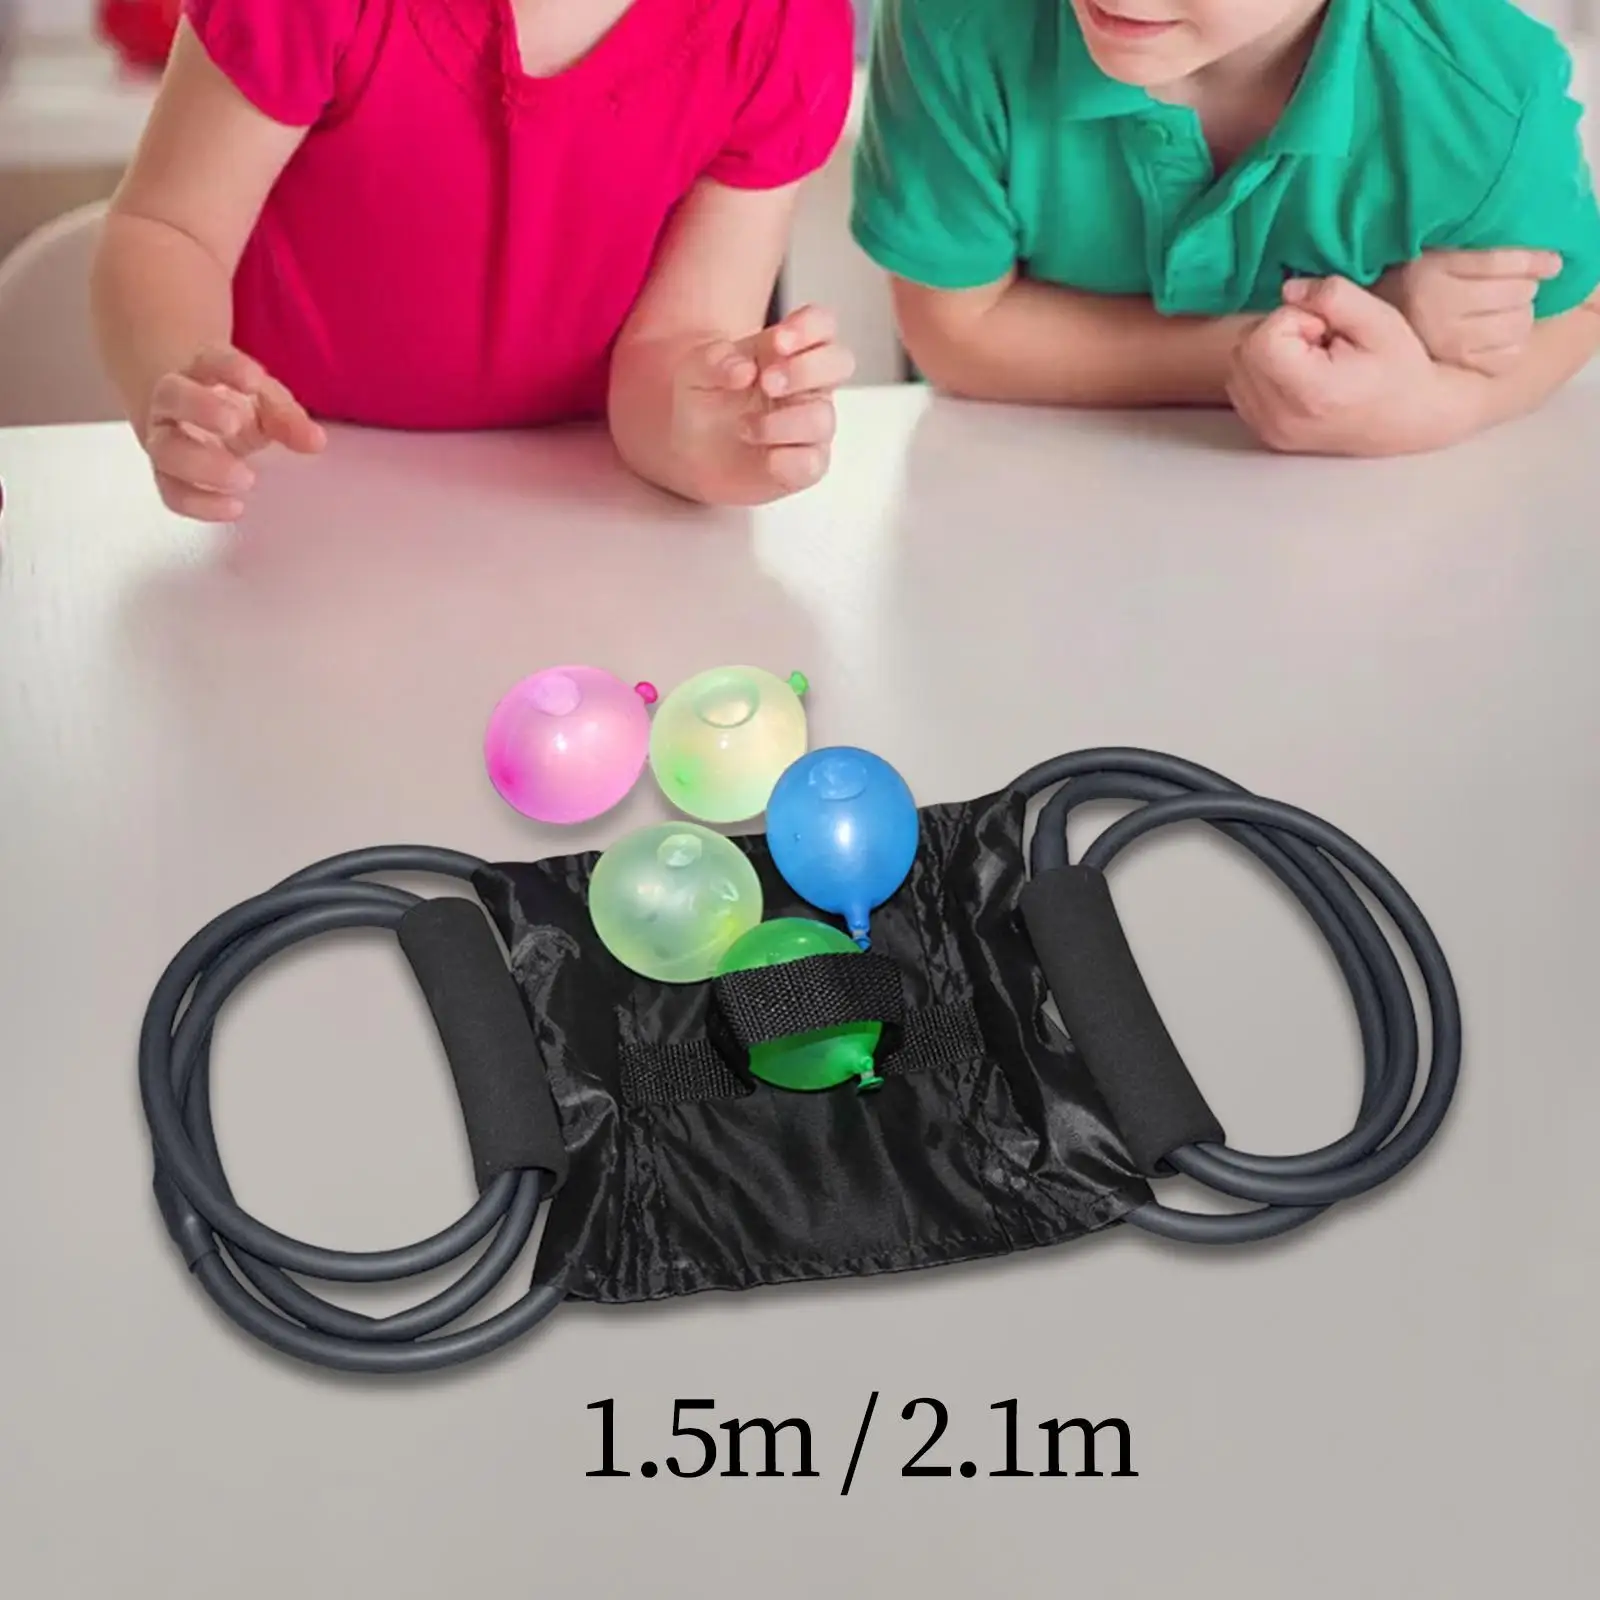 Water Balloon Launcher Snowball Launcher 3 Person for Holidays